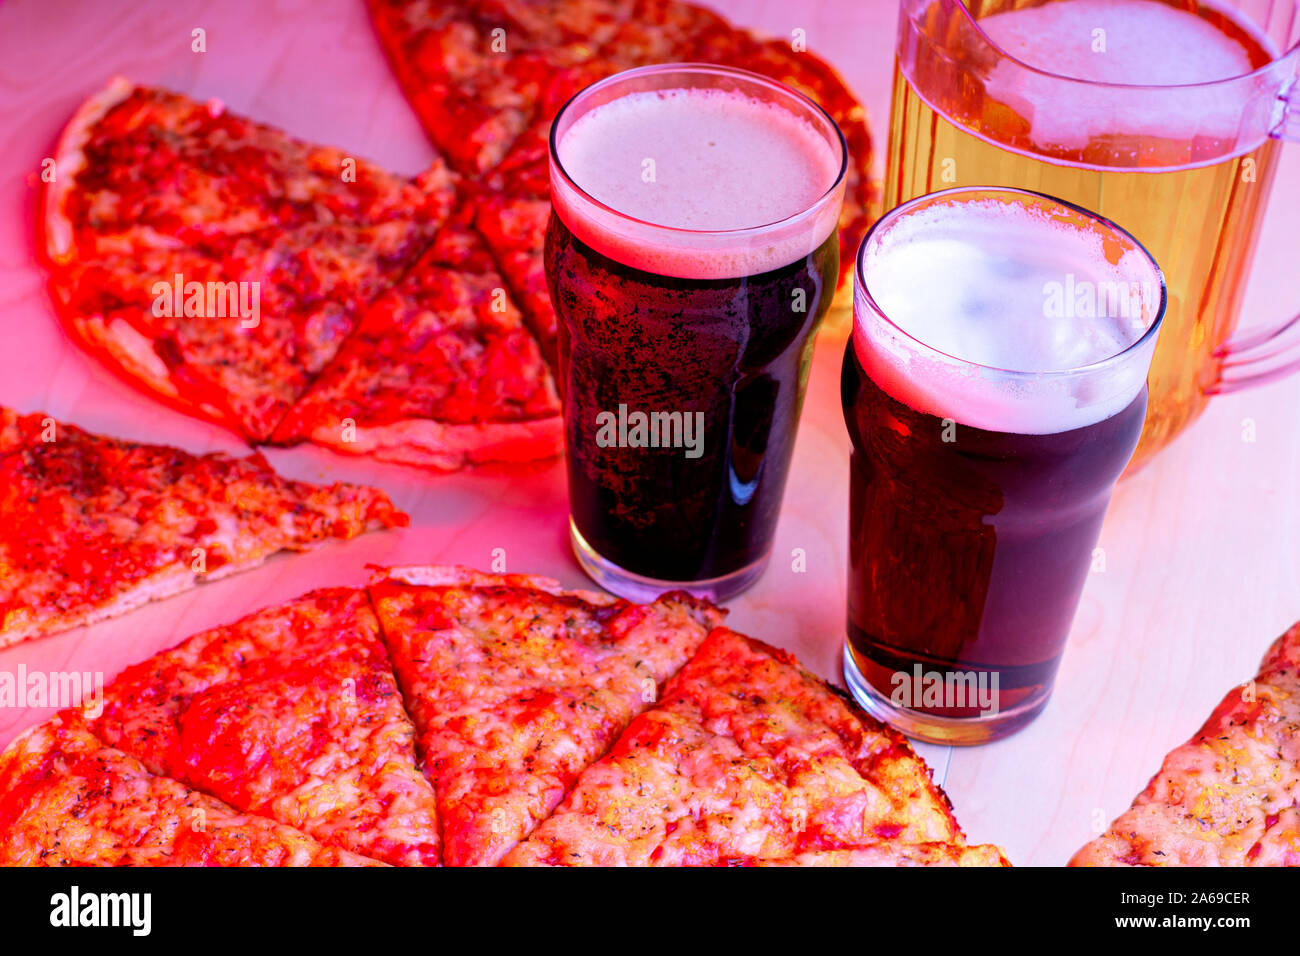 Glasses of beer, Beer Jug and a pizza with a red lights at night Stock Photo